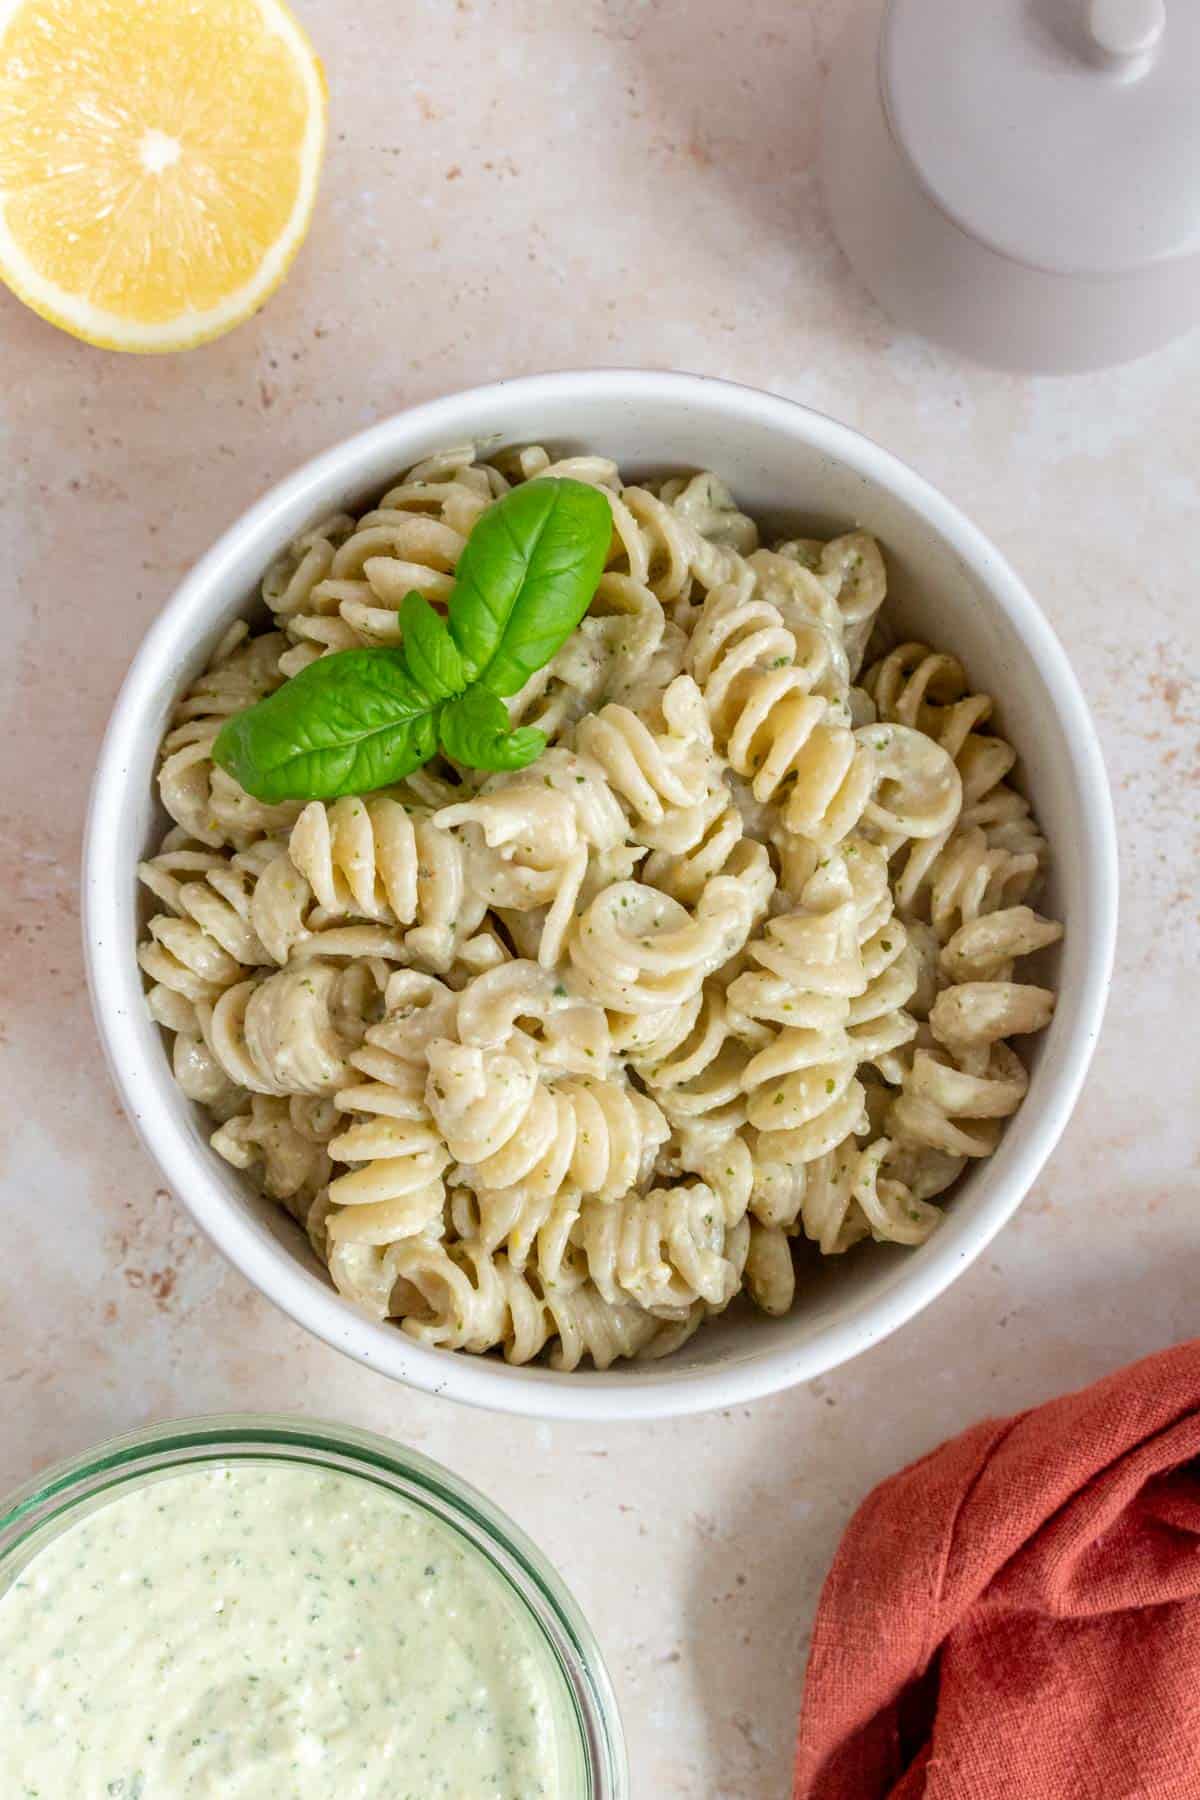 A bowl of pasta coated in cottage cheese pesto.